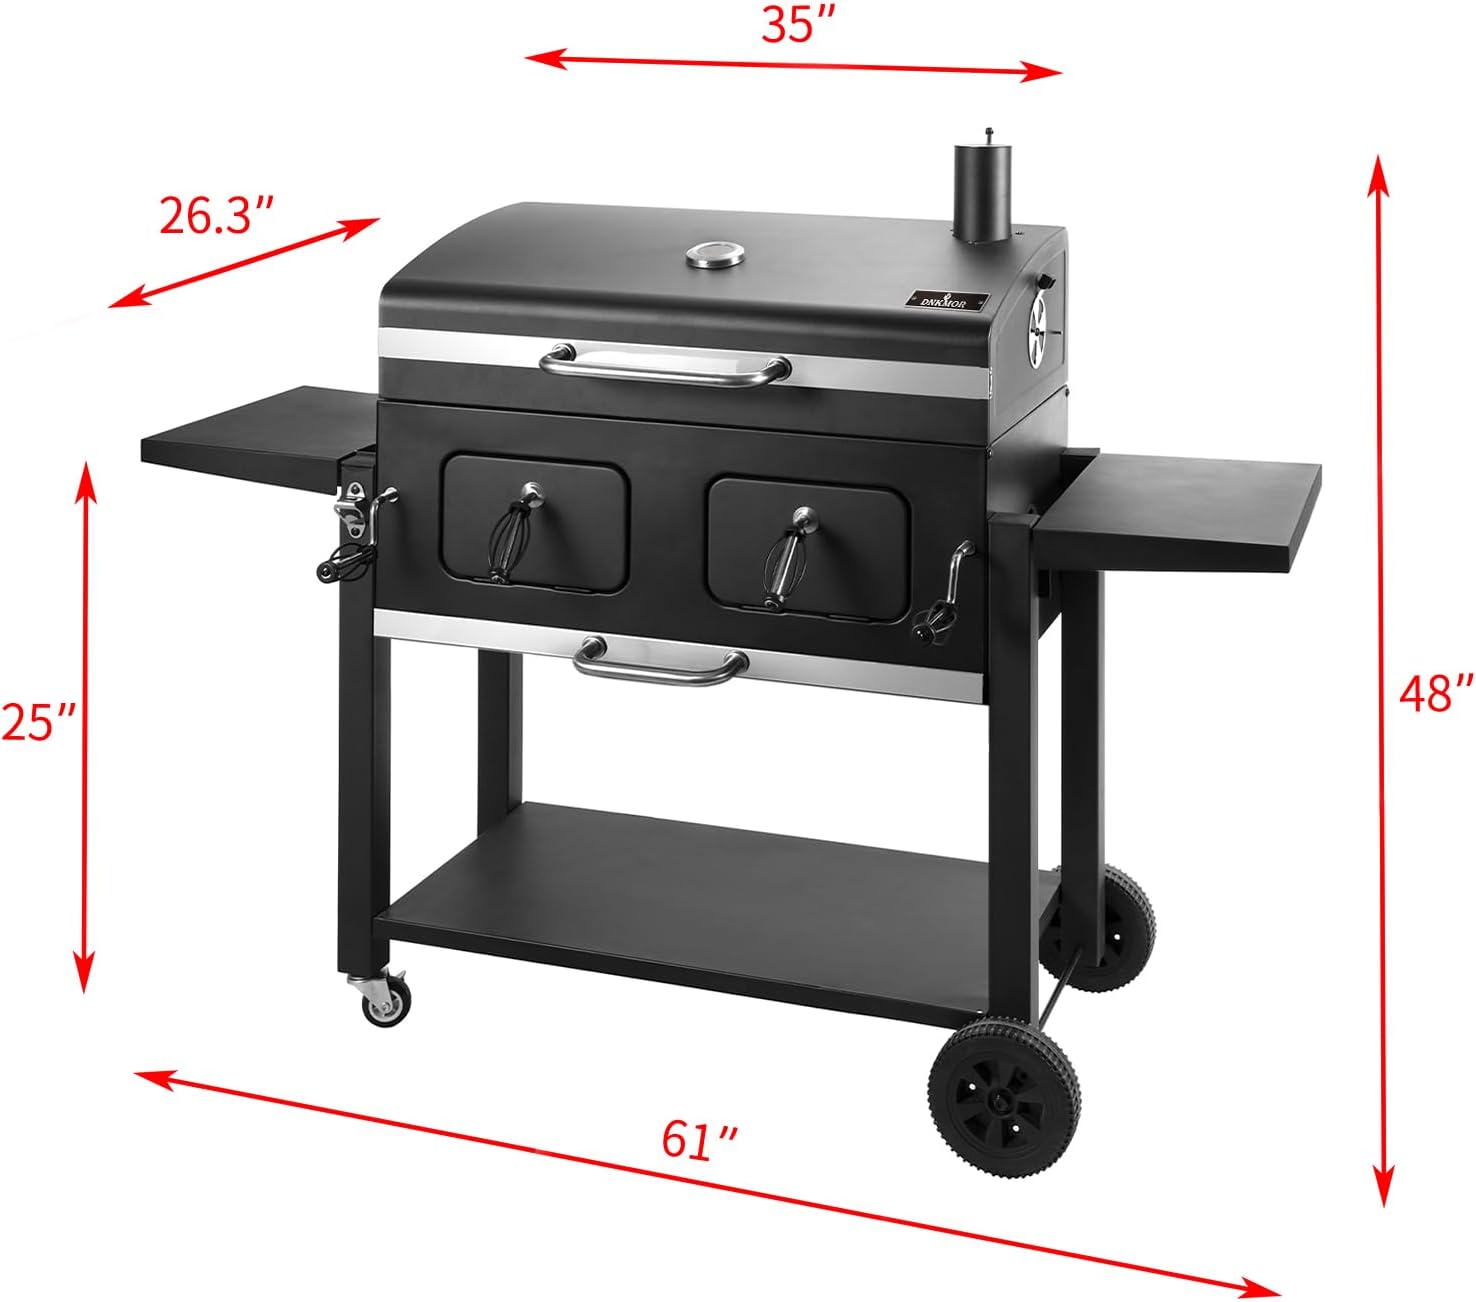 Charcoal Grill Outdoor BBQ Grill, Extra Large Cooking Area 794 Square Inches with Two Individual  Adjustable Charcoal Tray, Foldable Side Tables for Outdoor Cooking Backyard Camping Picnics By DNKMOR